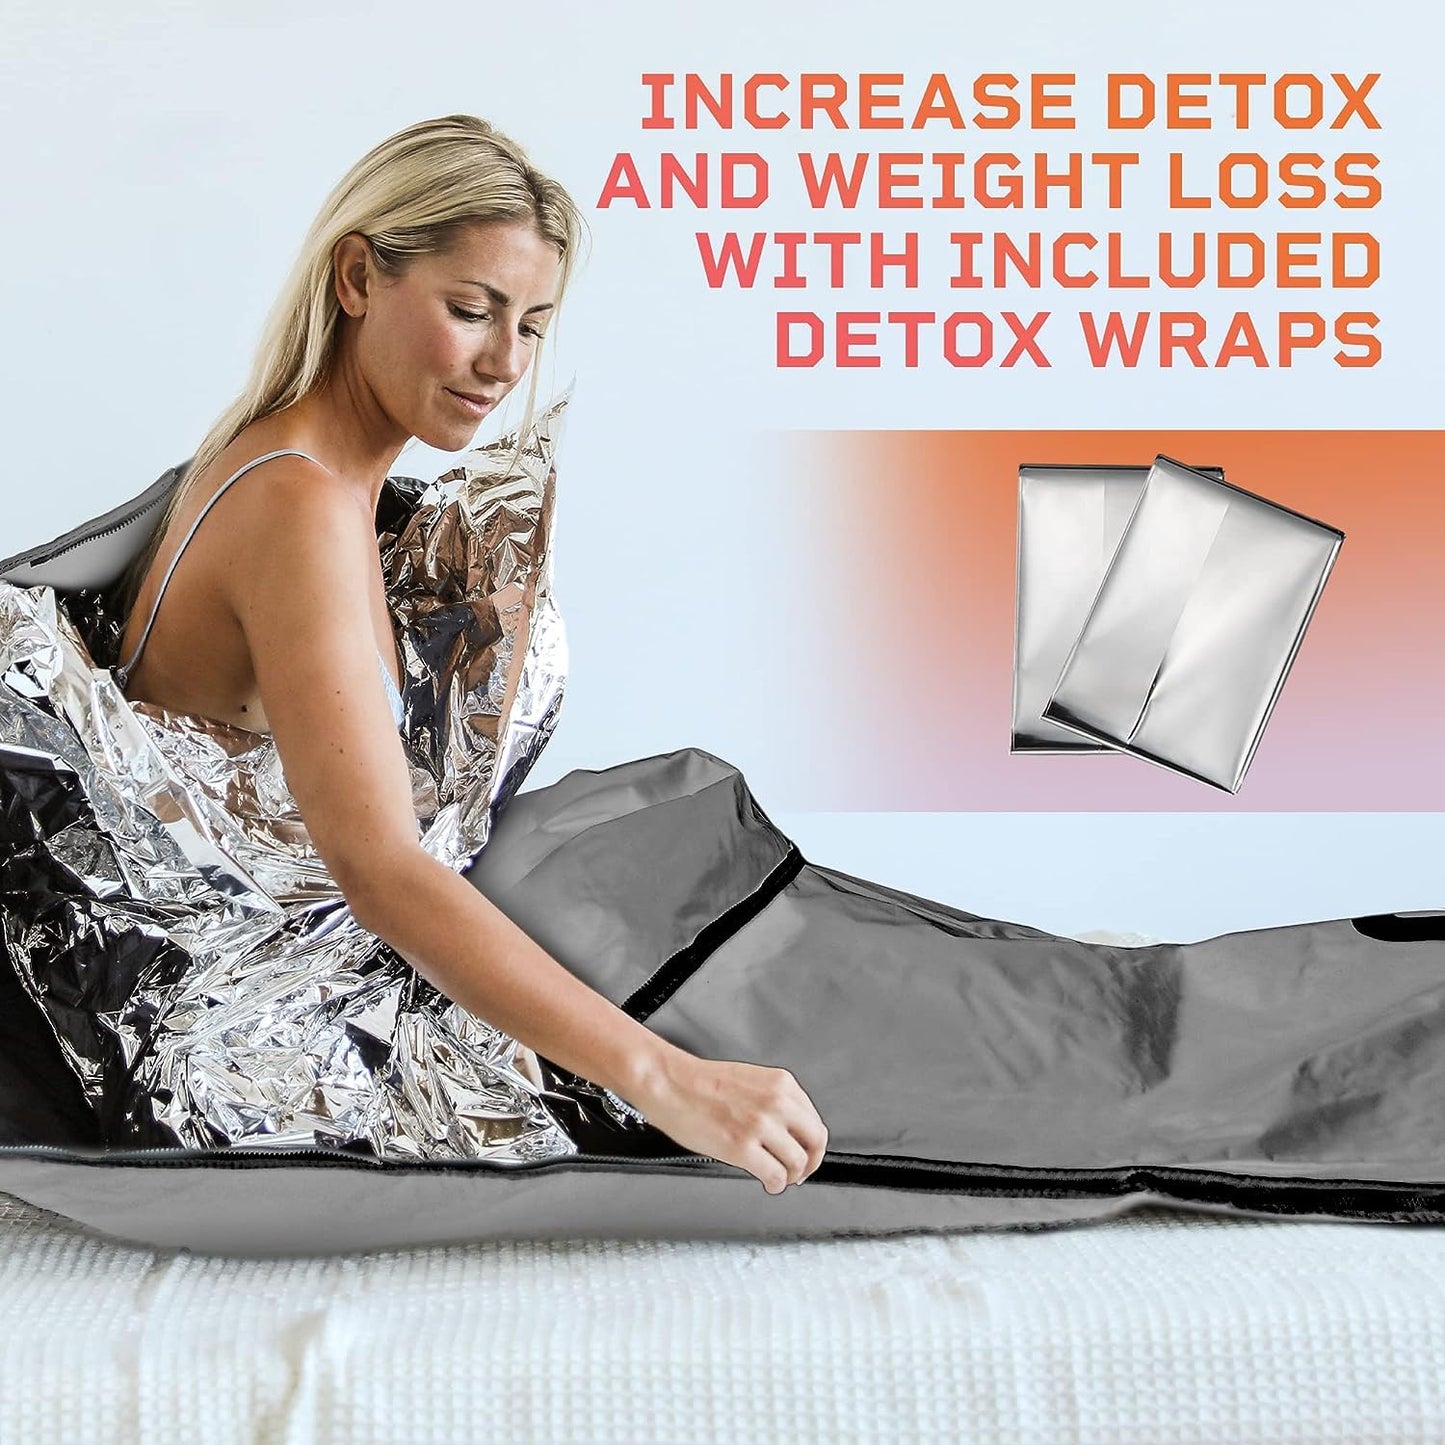 LifePro Sauna Blanket for Detoxification - Portable Far Infrared Sauna for Home Detox Calm your Body and Mind Regular Gray - Sauna for in-Home Use